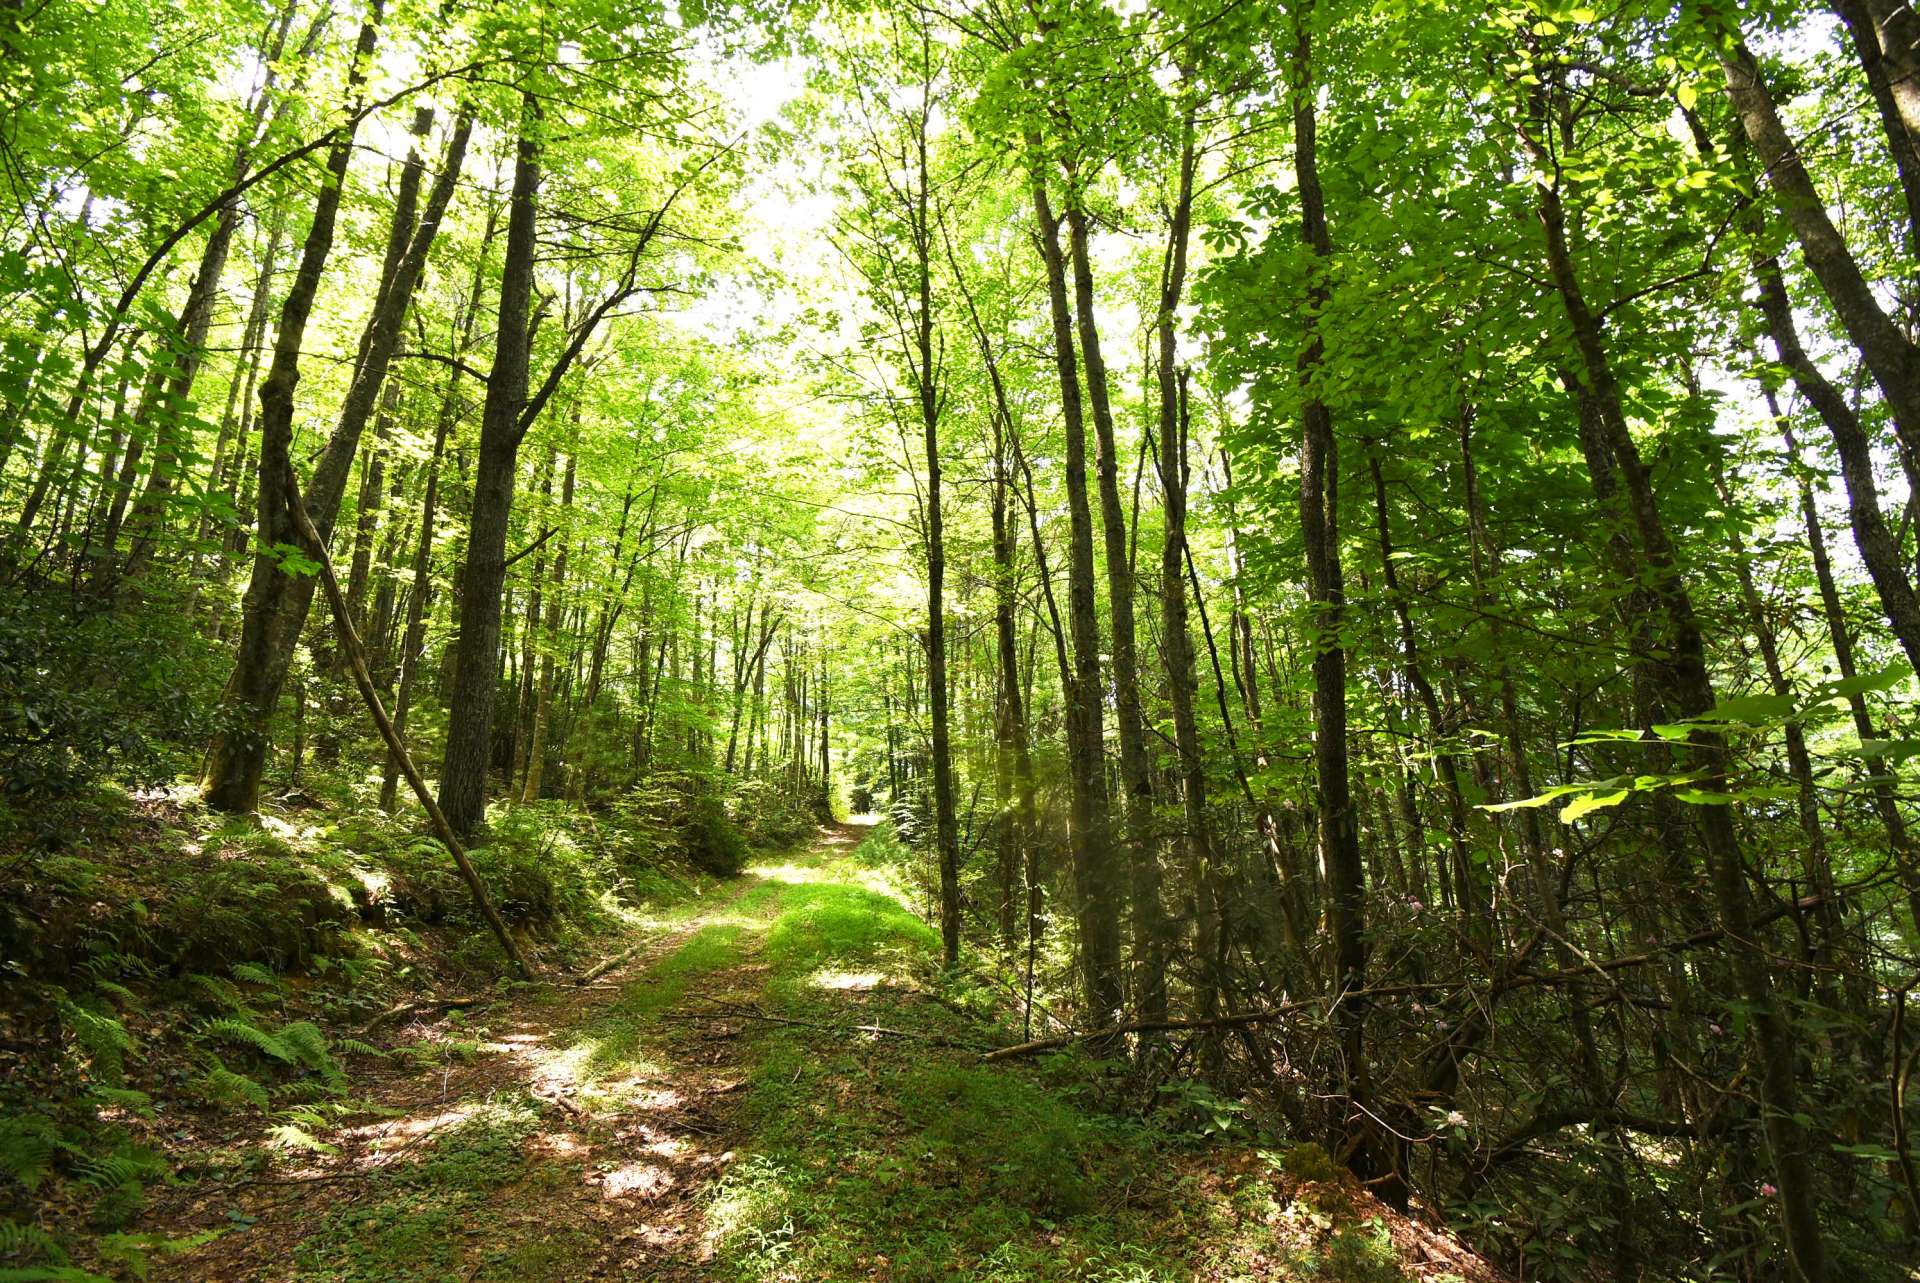 This large tract is home to a variety of wildlife, including whitetail deer, turkey, and the occasional black bear.